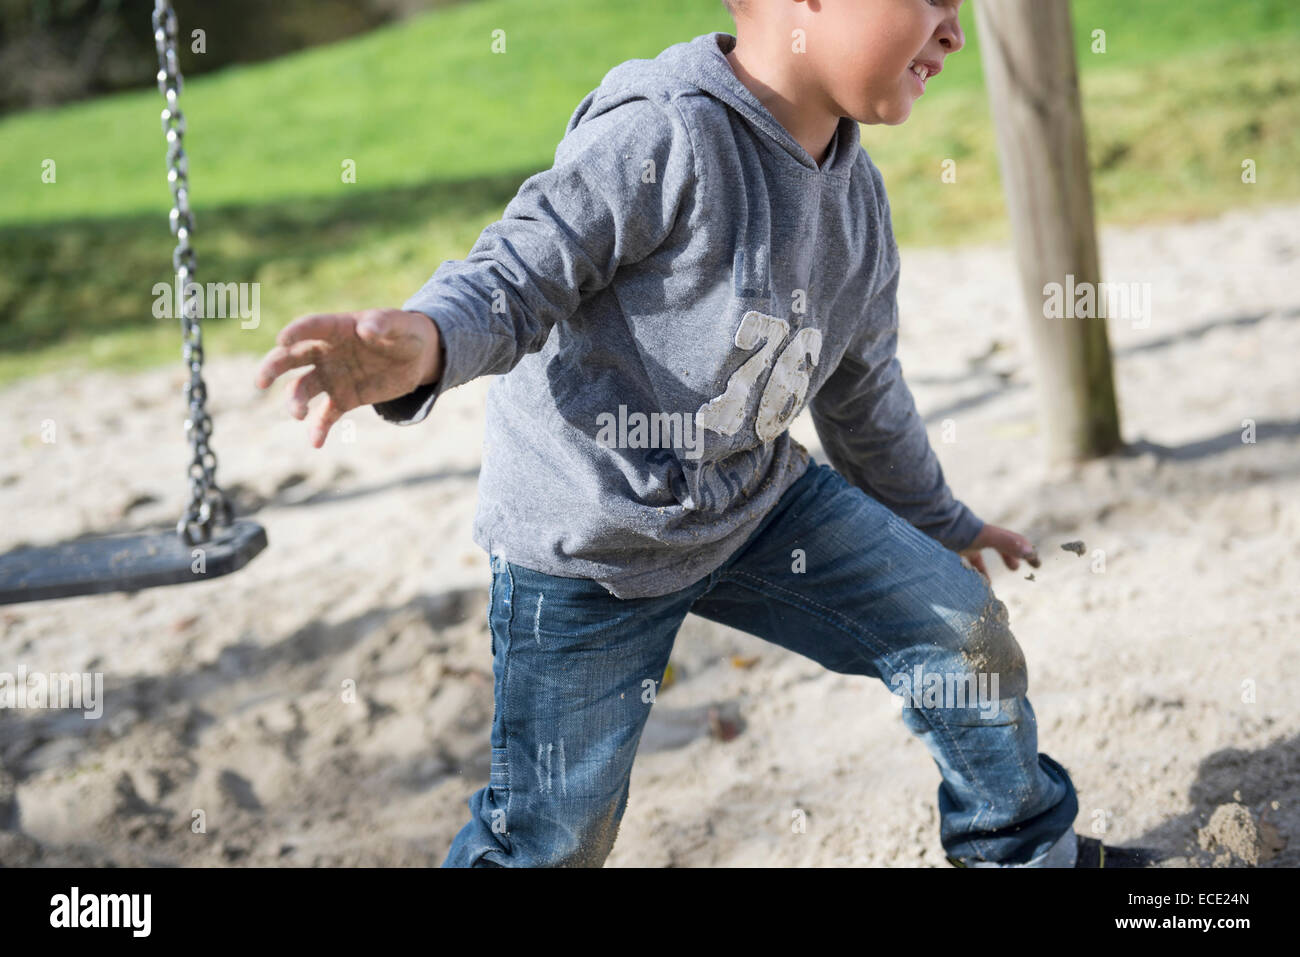 Boy playing swing playground sand action Stock Photo